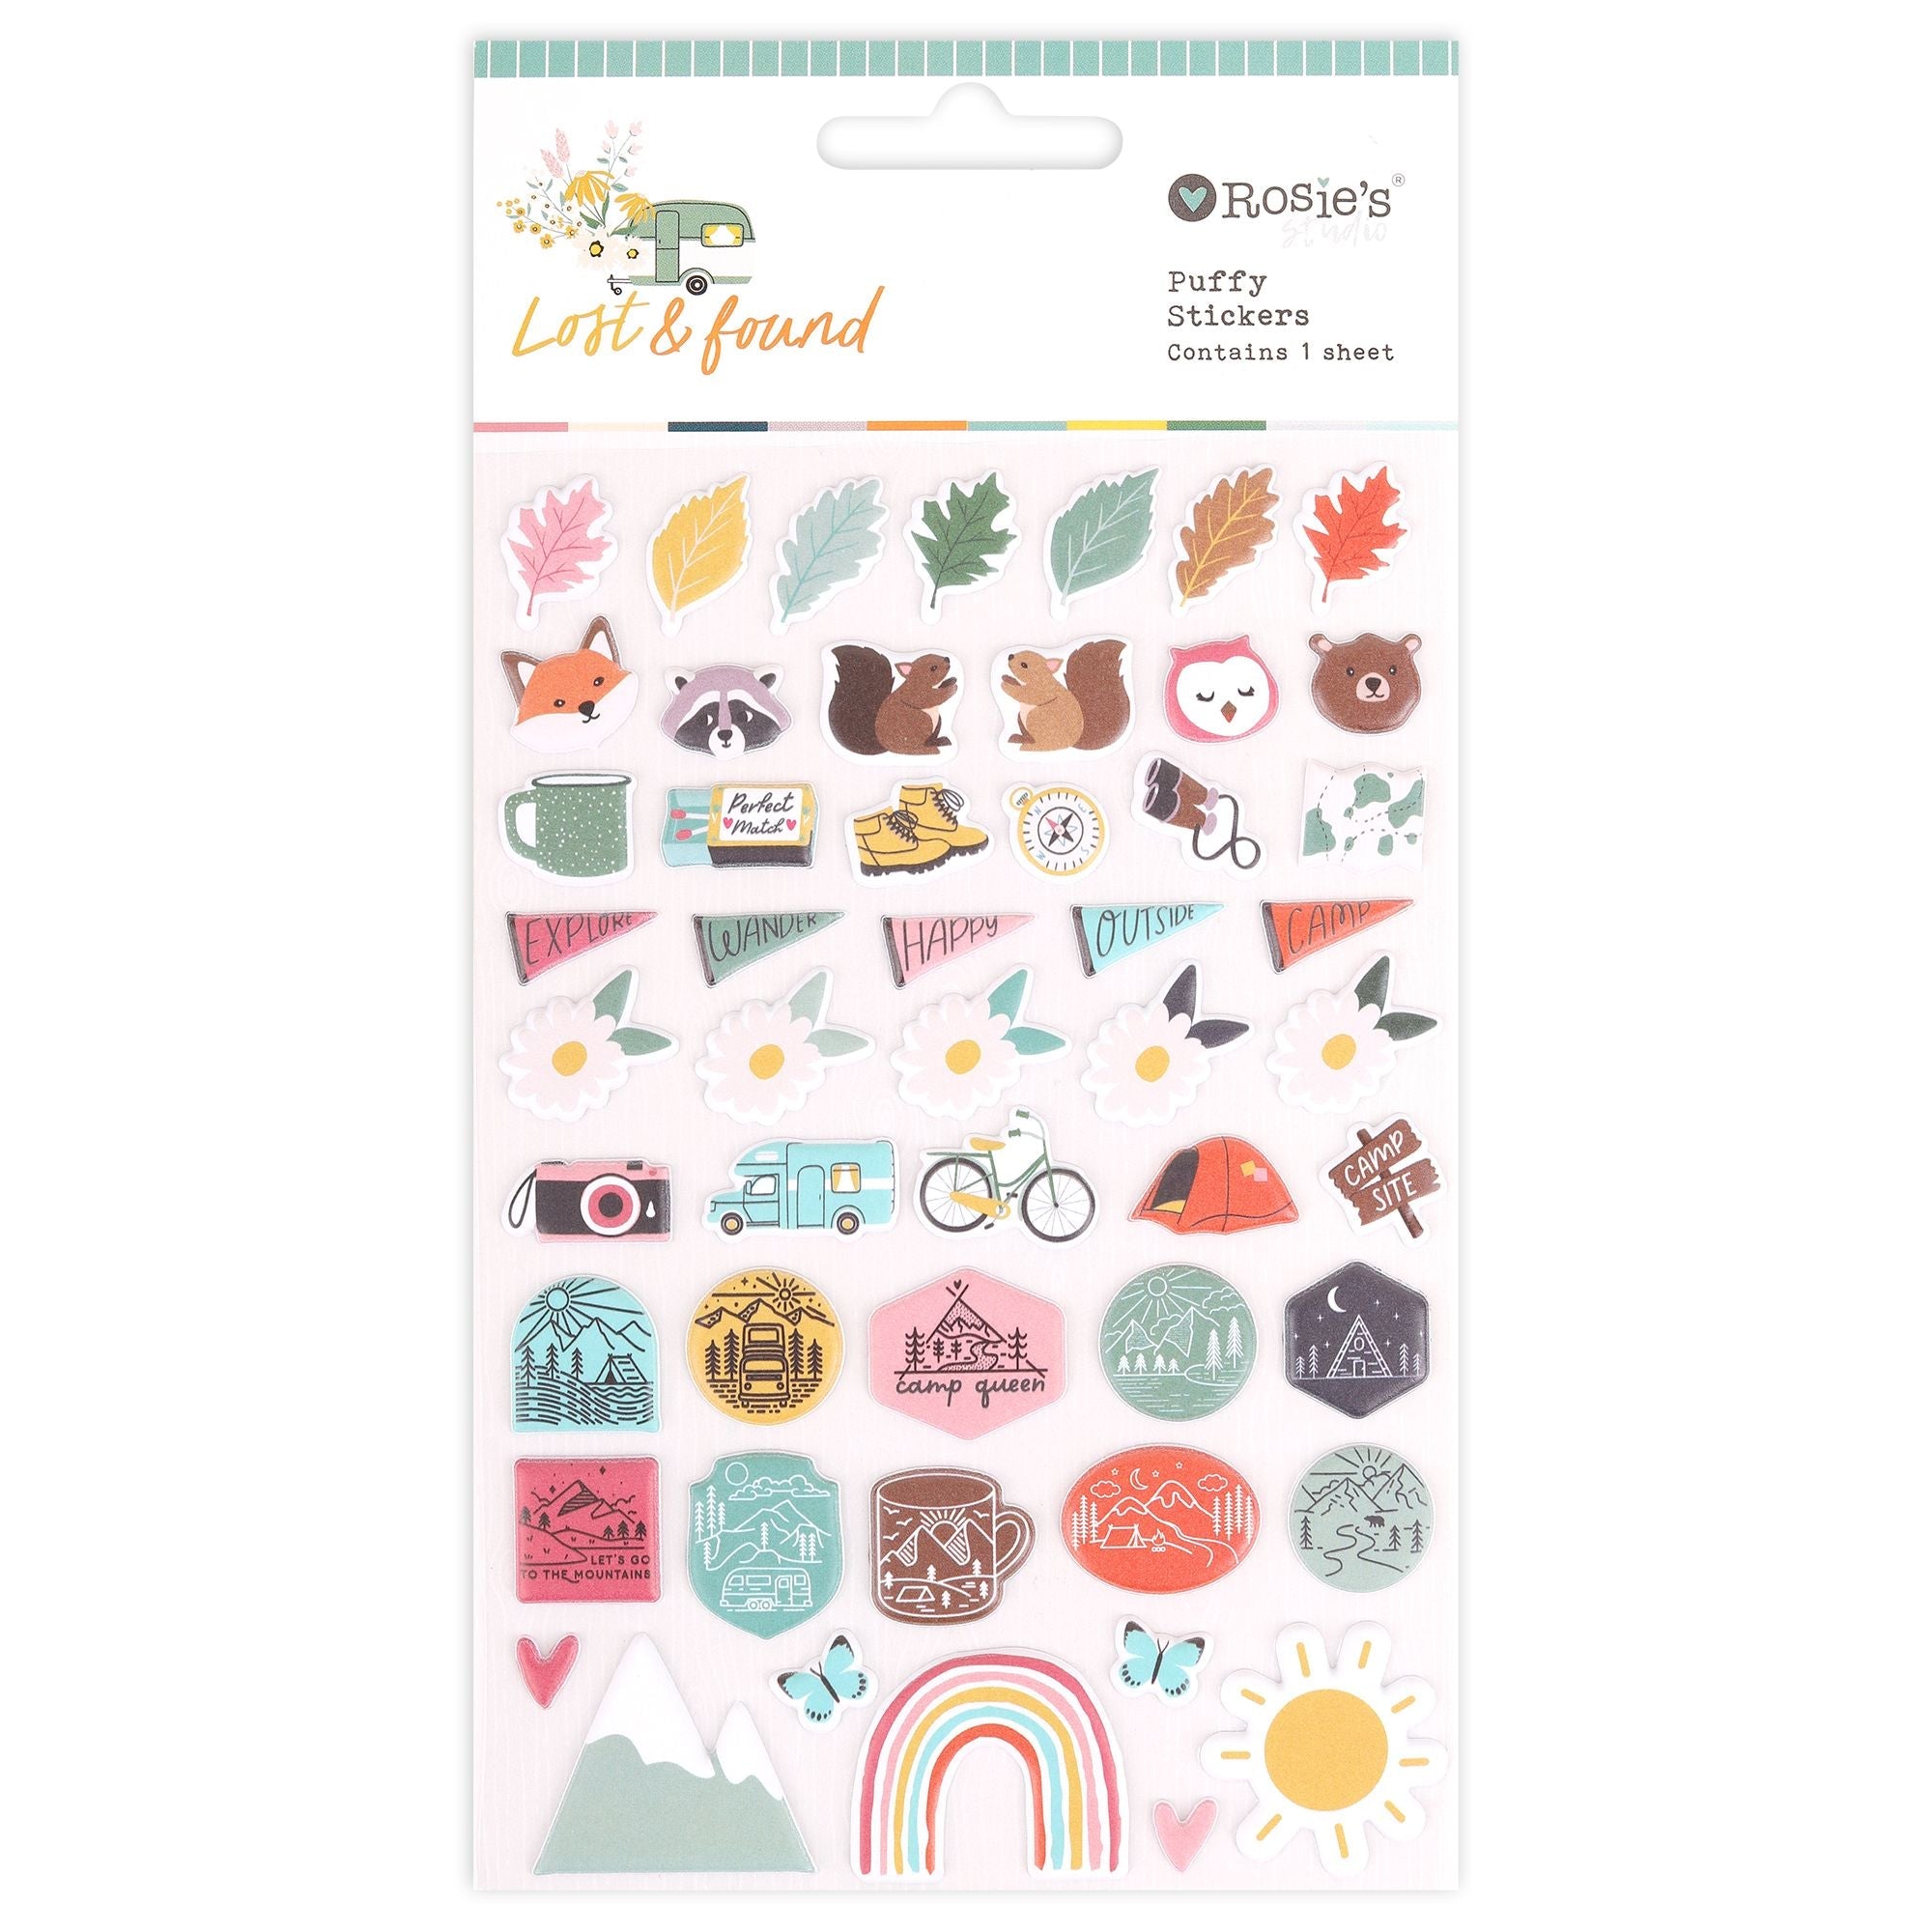 Doodlebug Puffy Heart Stickers- Lily White